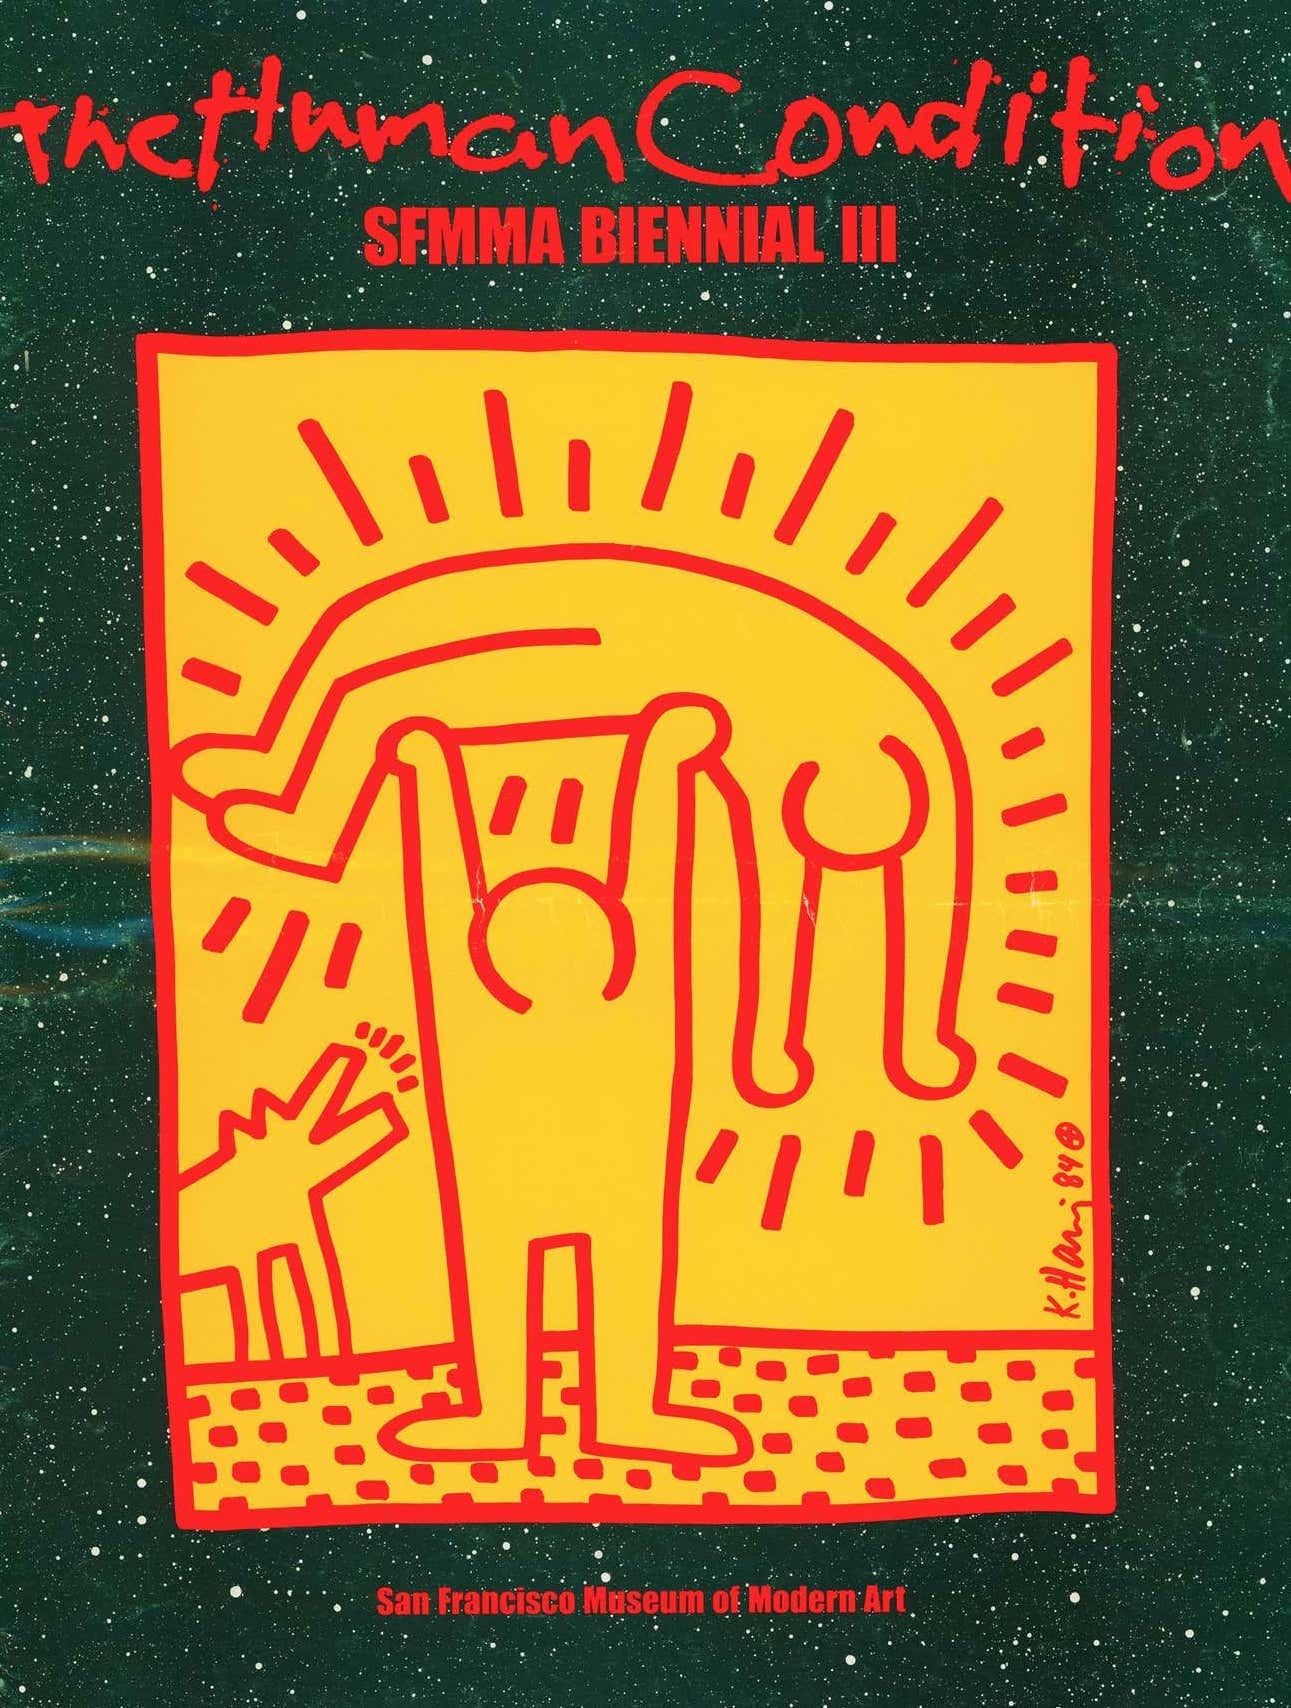 Keith Haring Cover Art SFMMA 1984:
Published by the San Francisco Museum of Modern Art on the occasion of ‘The Human Condition SFMMA Biennial III’ 28 June-26 August 1984. Cover art created by Keith Haring specifically for the exhibit. Includes work